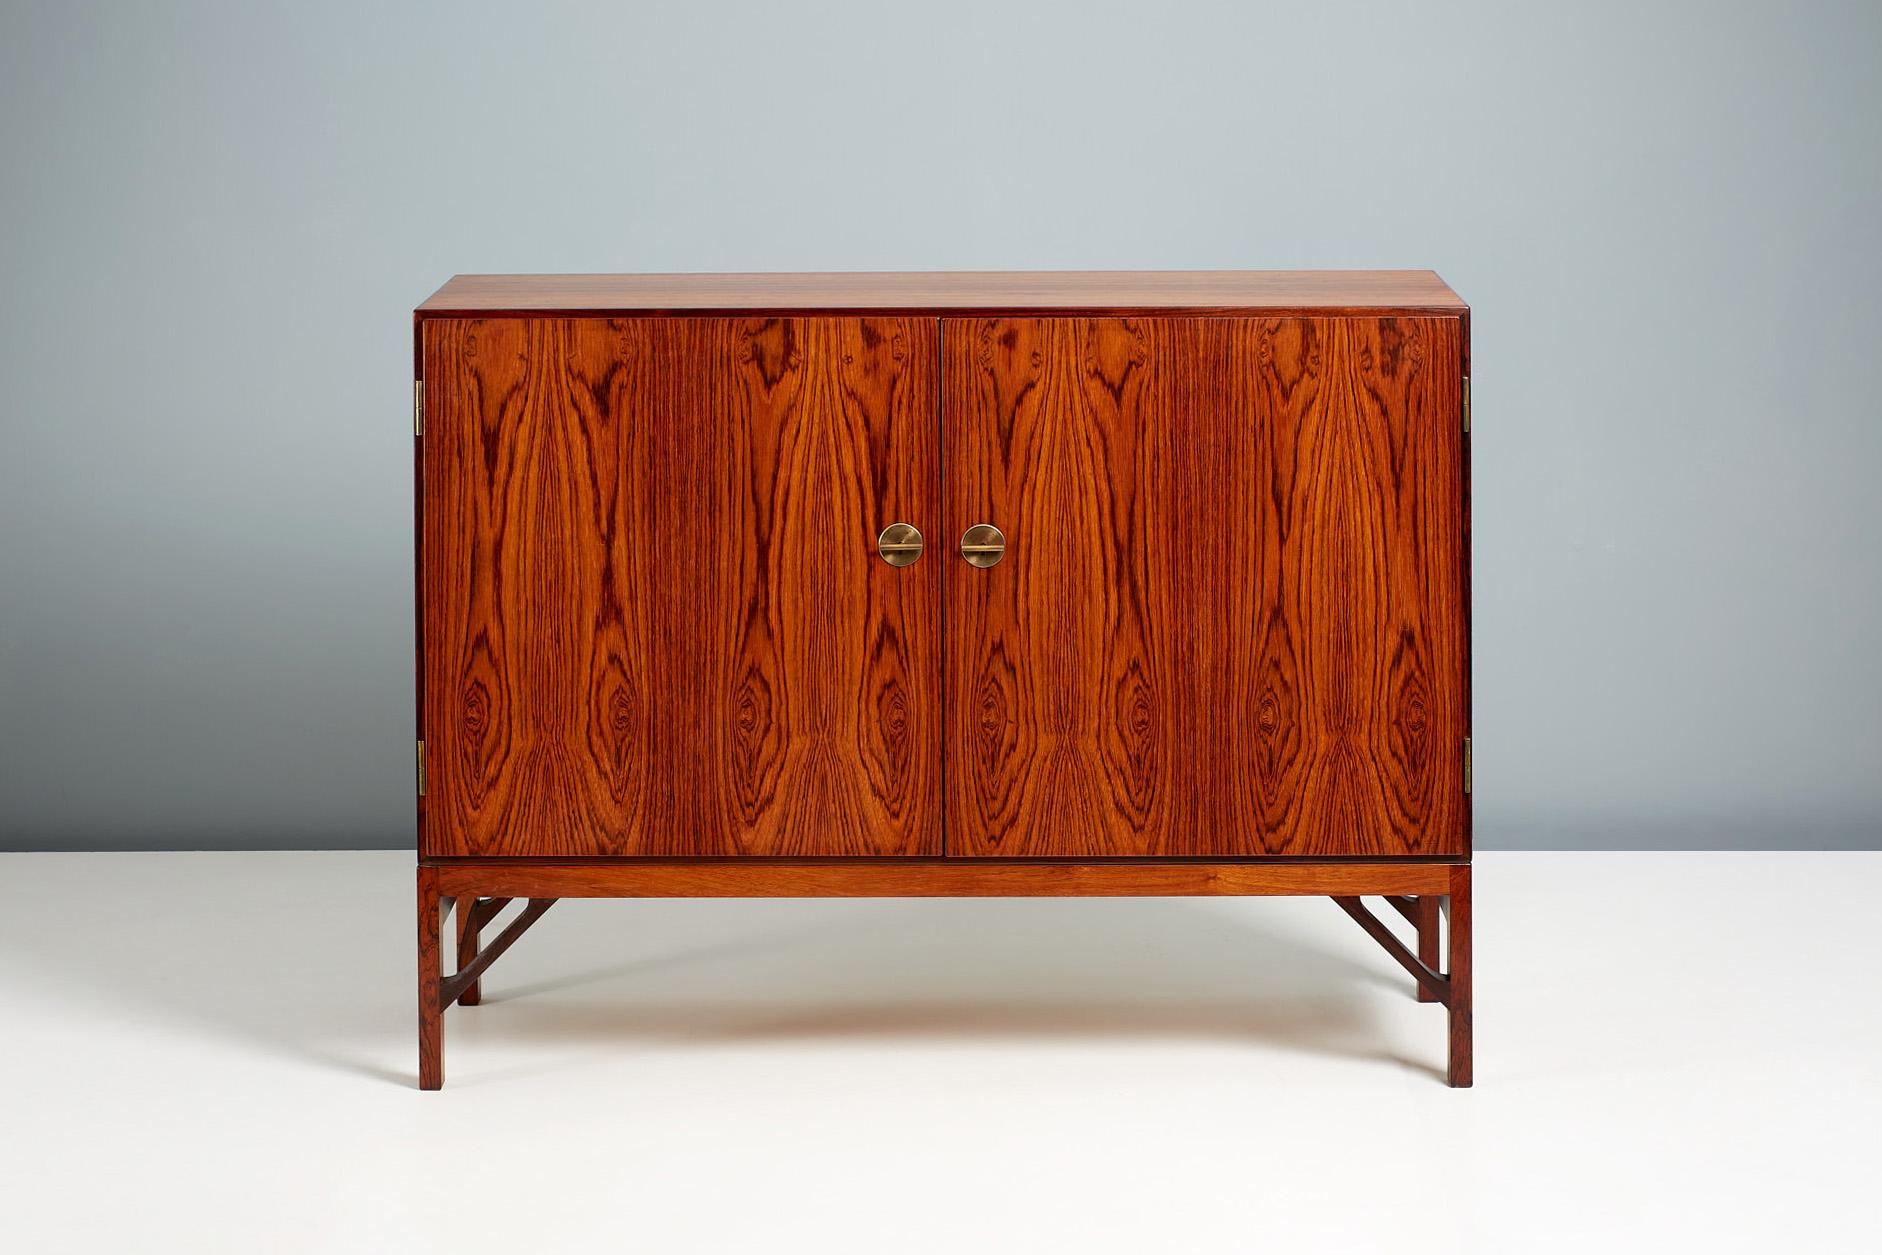 Borge Mogensen - Model A 232 Cabinet

Rarely seen rosewood version of Mogensen's iconic cabinet design. The front has two doors with Chinese style decorative brass T-Bar keys. The interior is lined with Maple wood veneer and solid maple shelves and